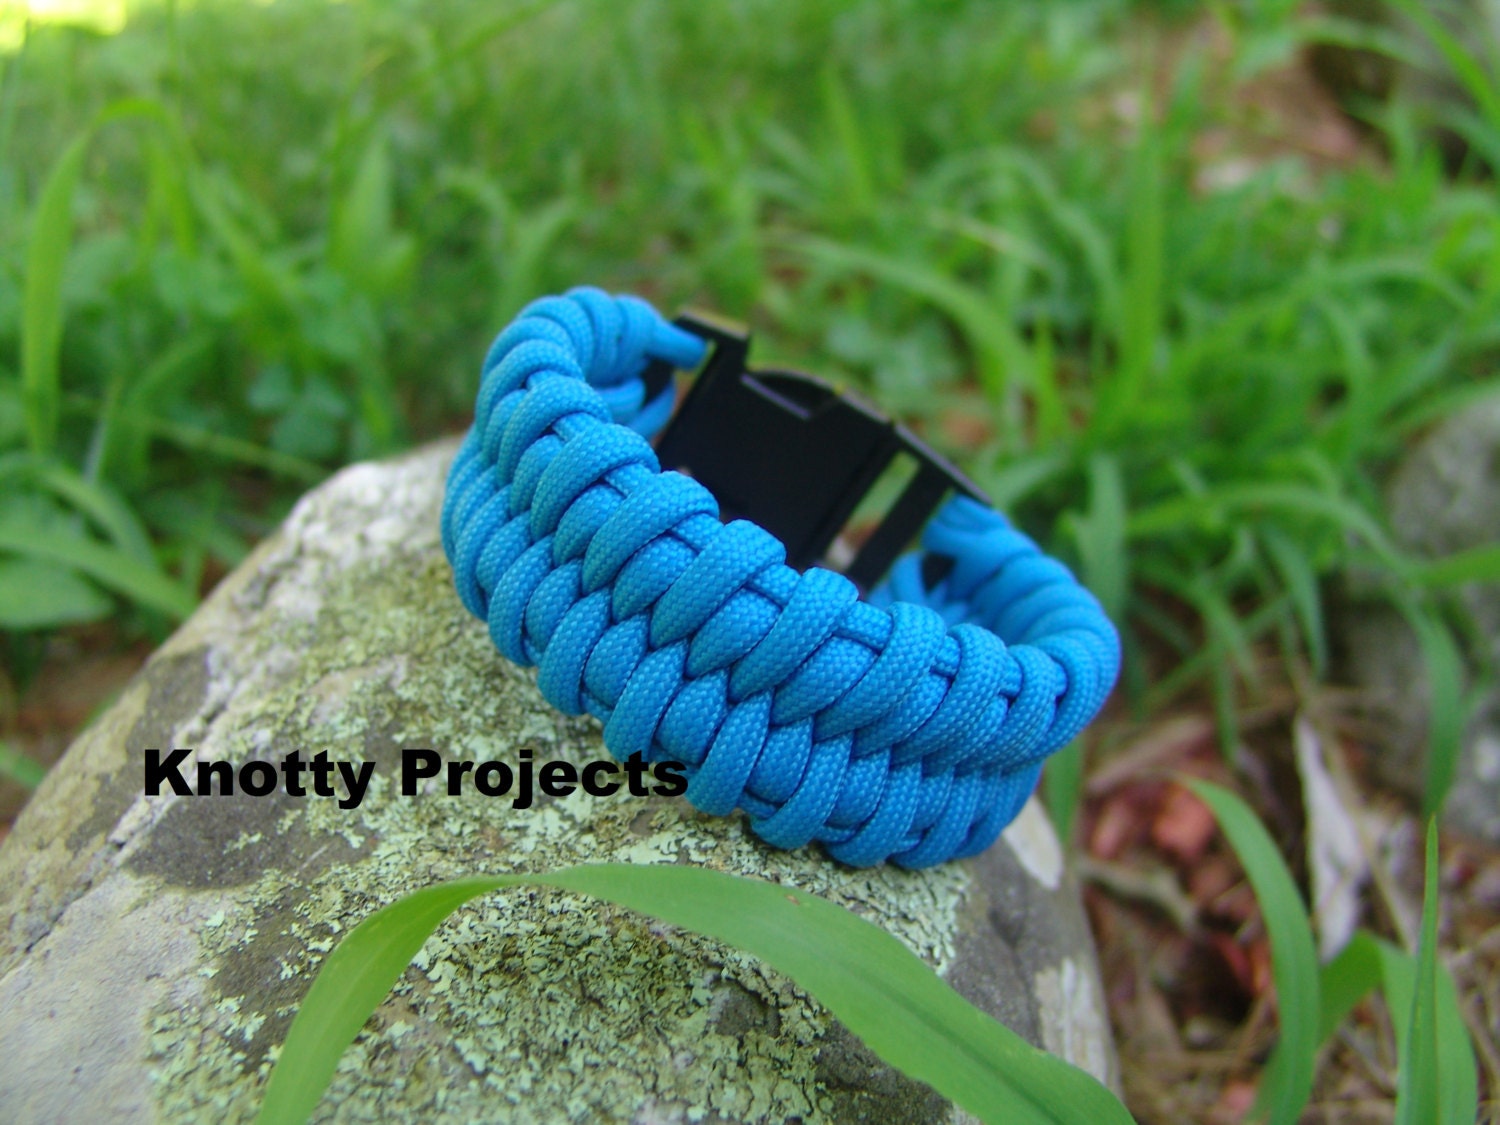 Stormdrane's Blog: A long 4 bight turks head knot over paracord...